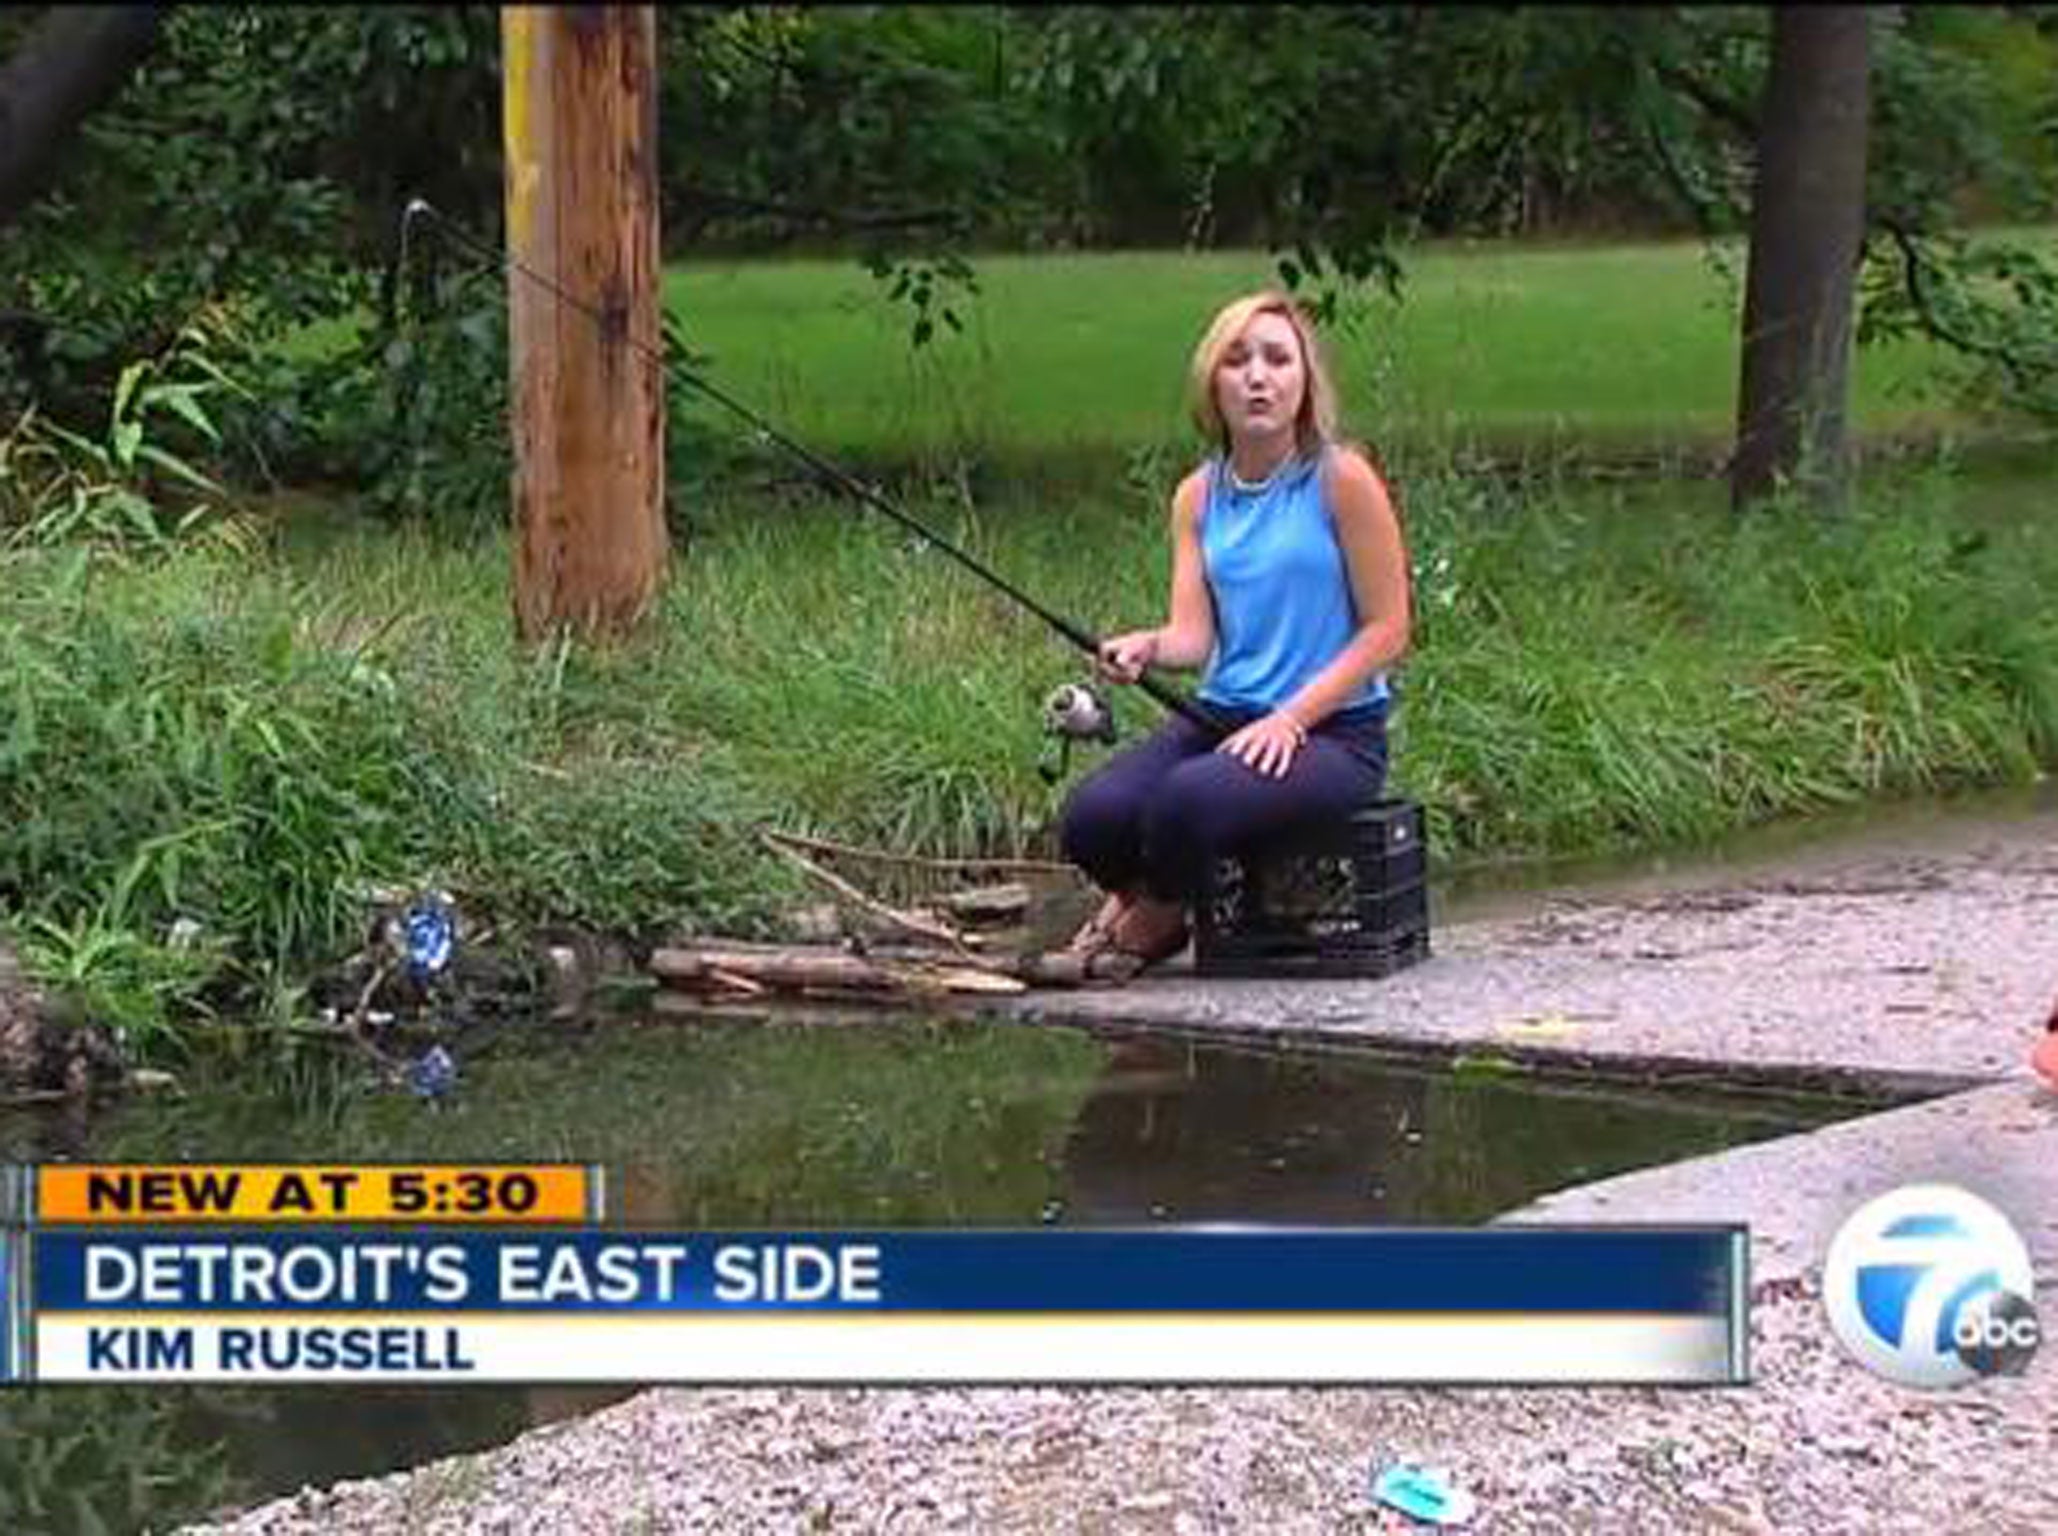 Local are fishing at a sinkhole in Detroit